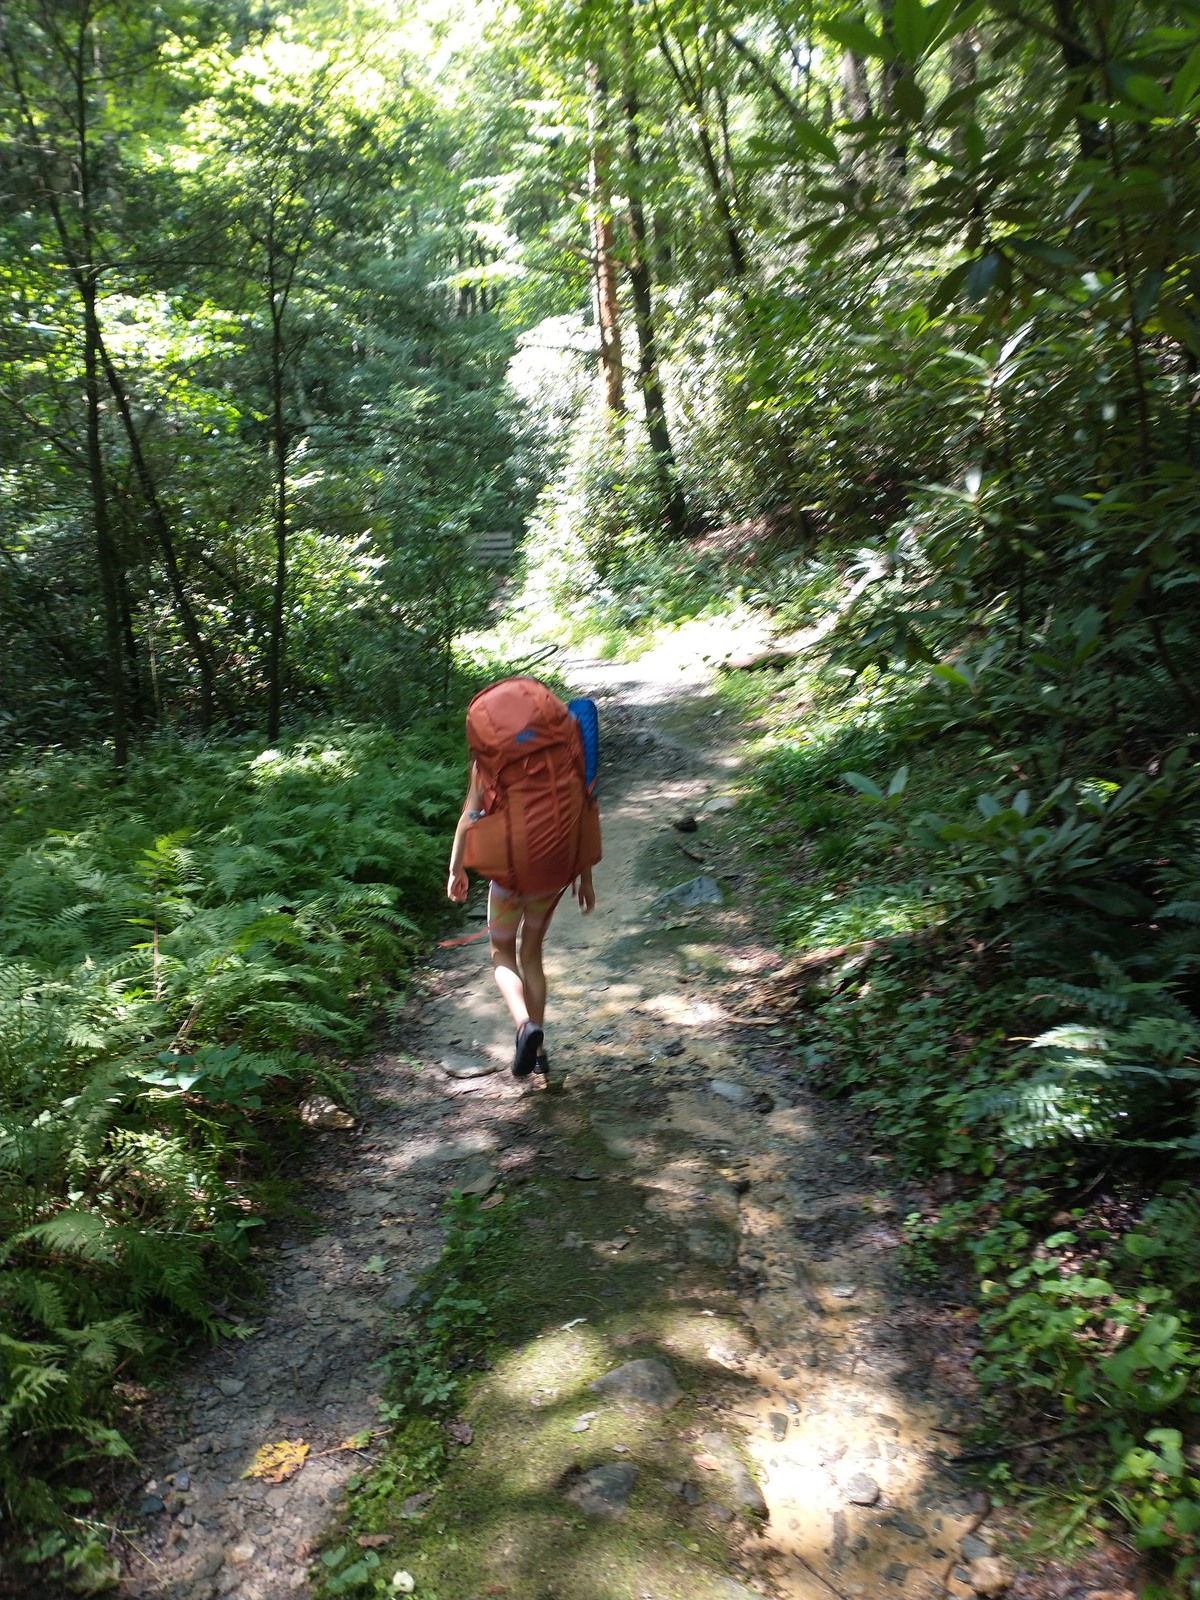 person with an orange bag walking through the dirt paths in a sun-spotted forest